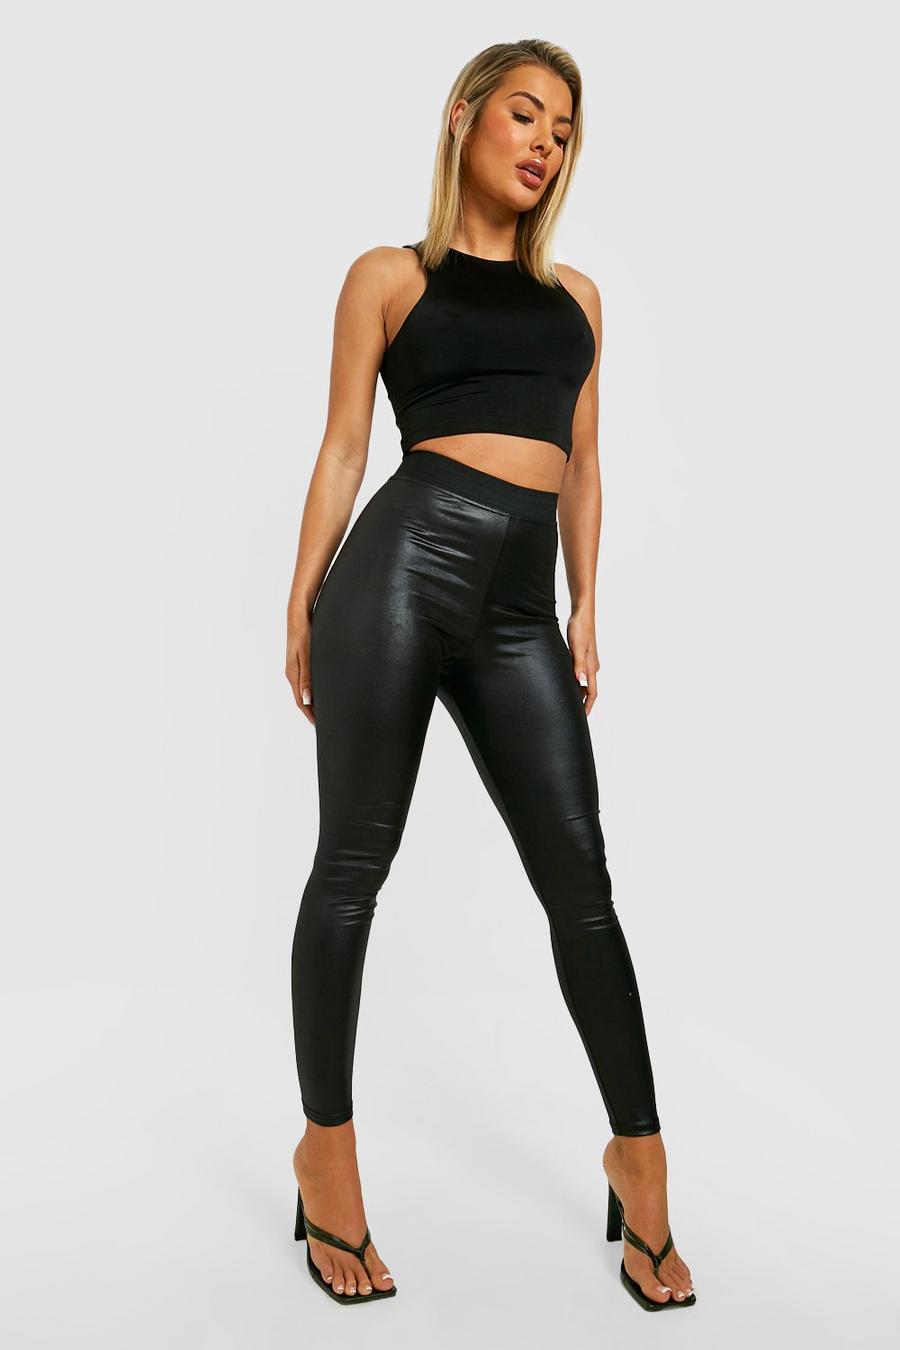 Black negro Cinched High Waisted Wet Look Leggings